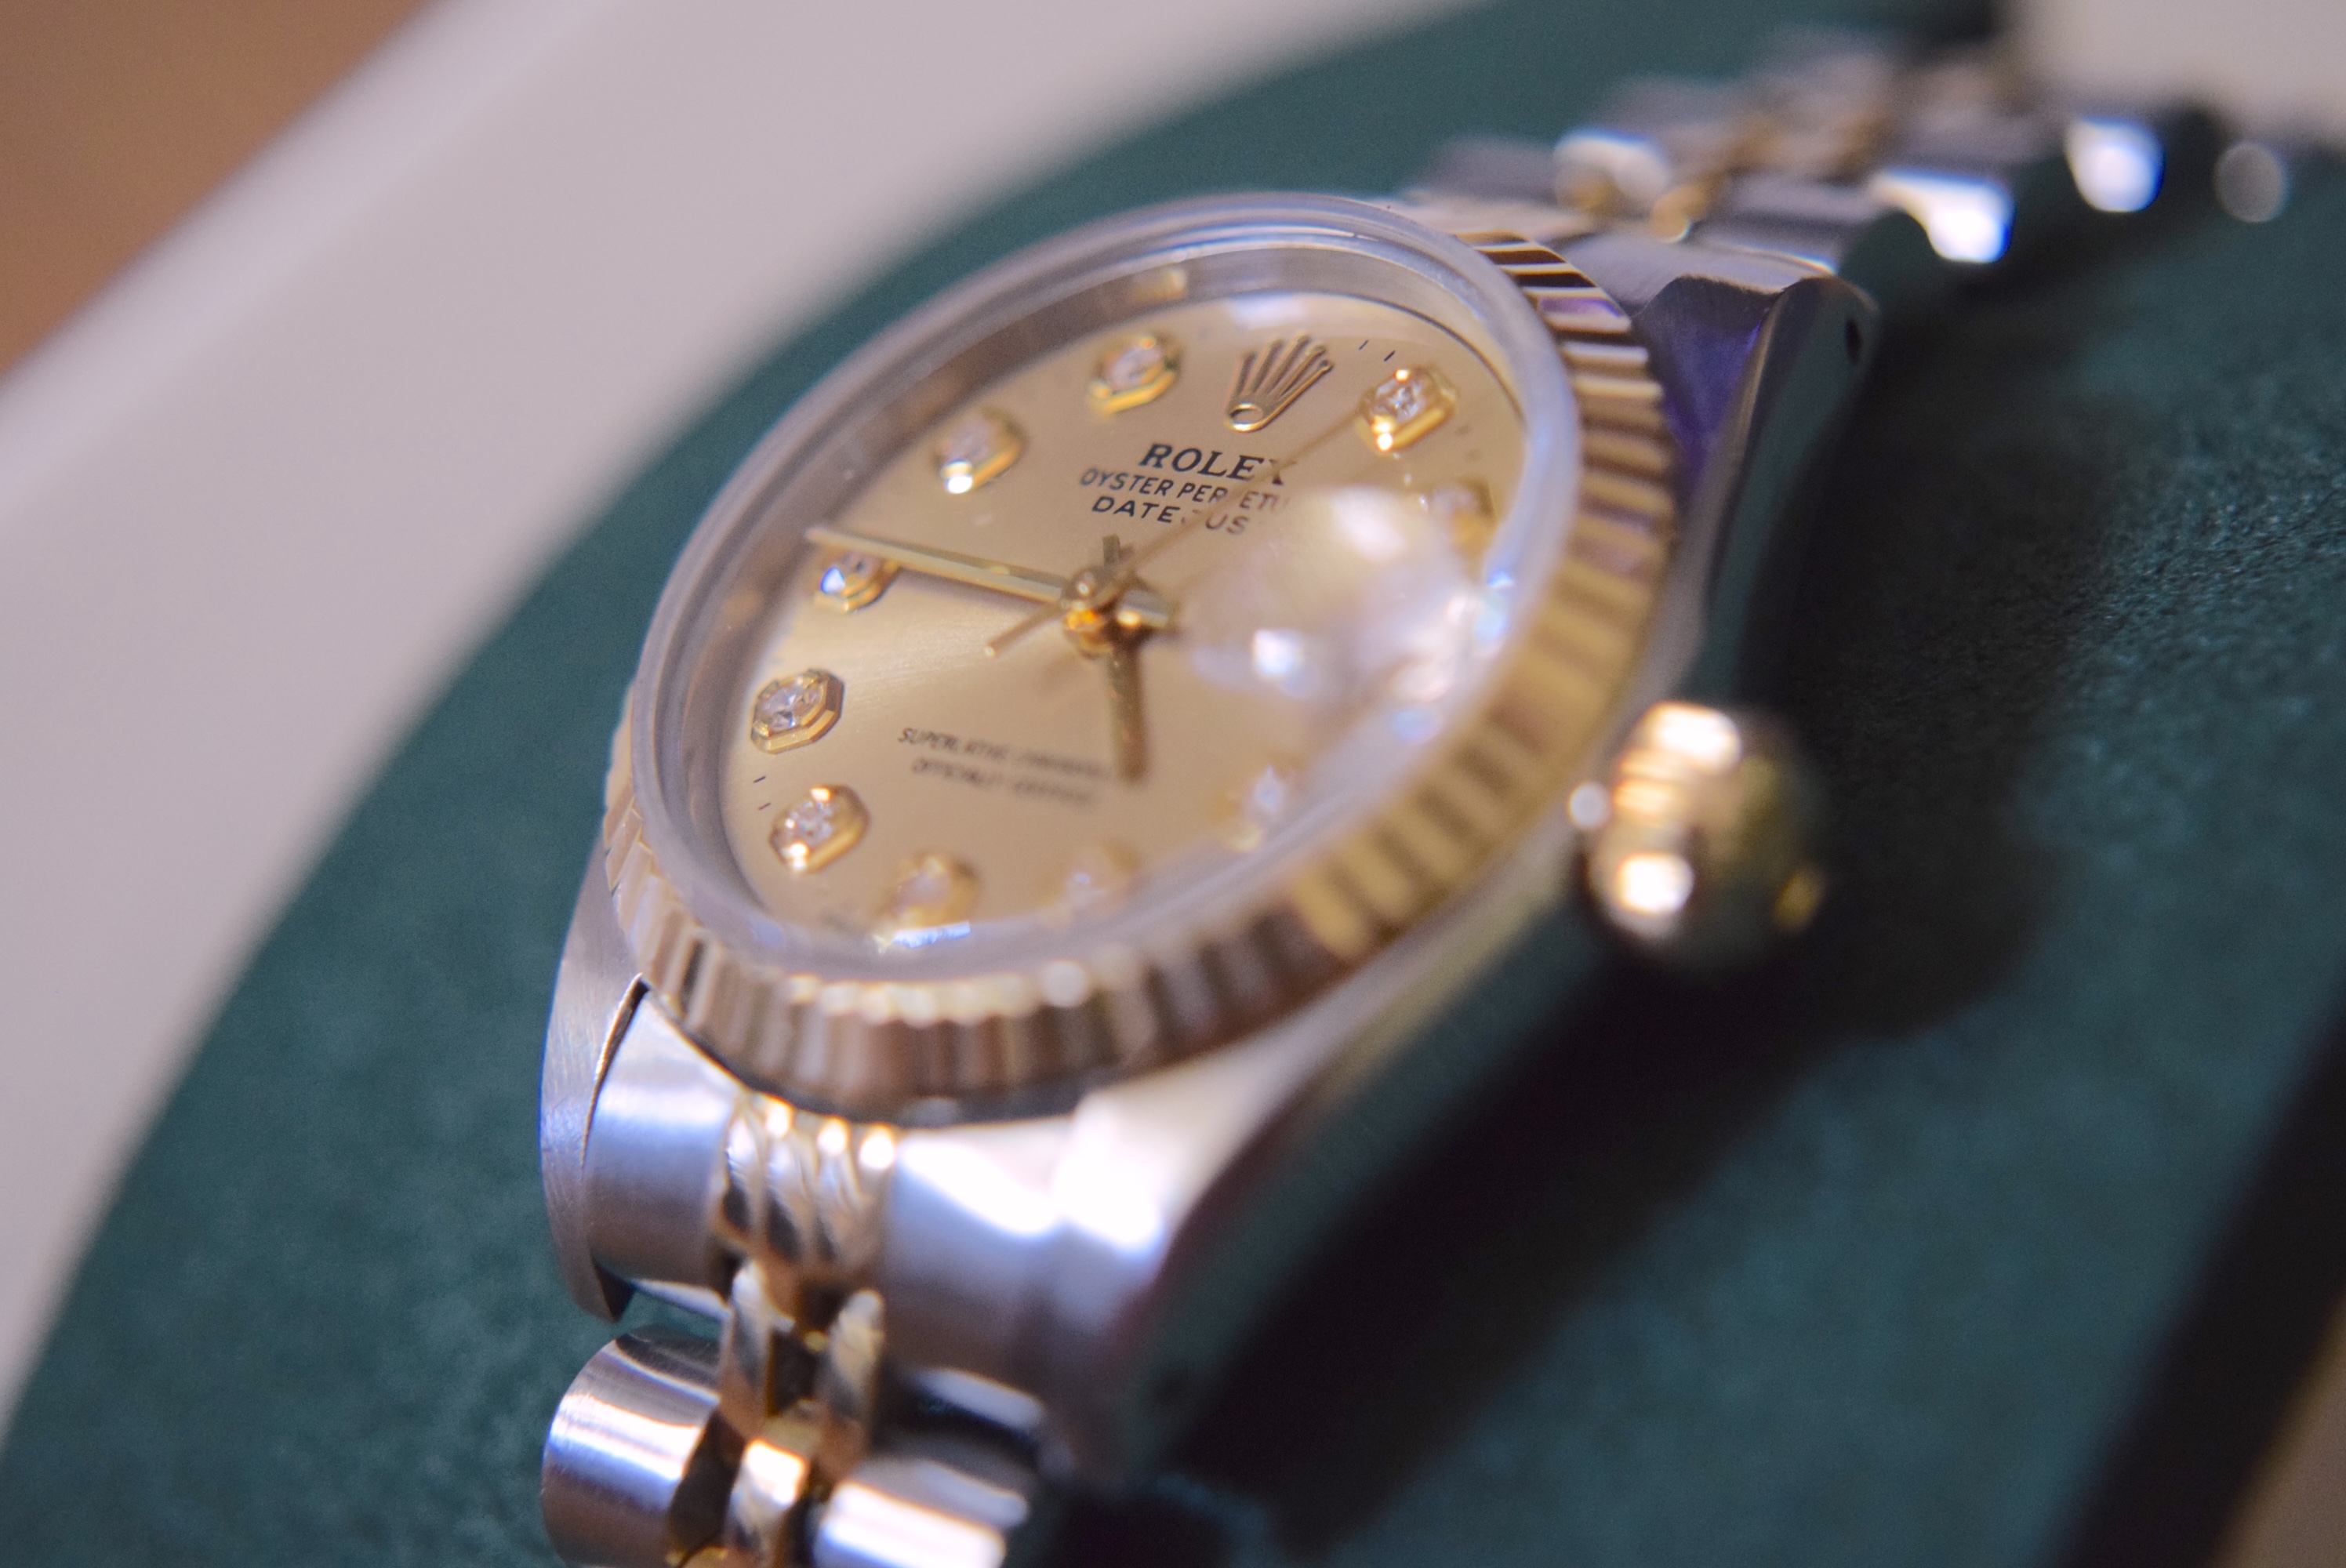 ROLEX DATEJUST 18CT GOLD/ STEEL 26MM LADIES MODEL (69173) - DIAMOND CHAMPAGNE DIAL - £9995 VALUATION - Image 3 of 10